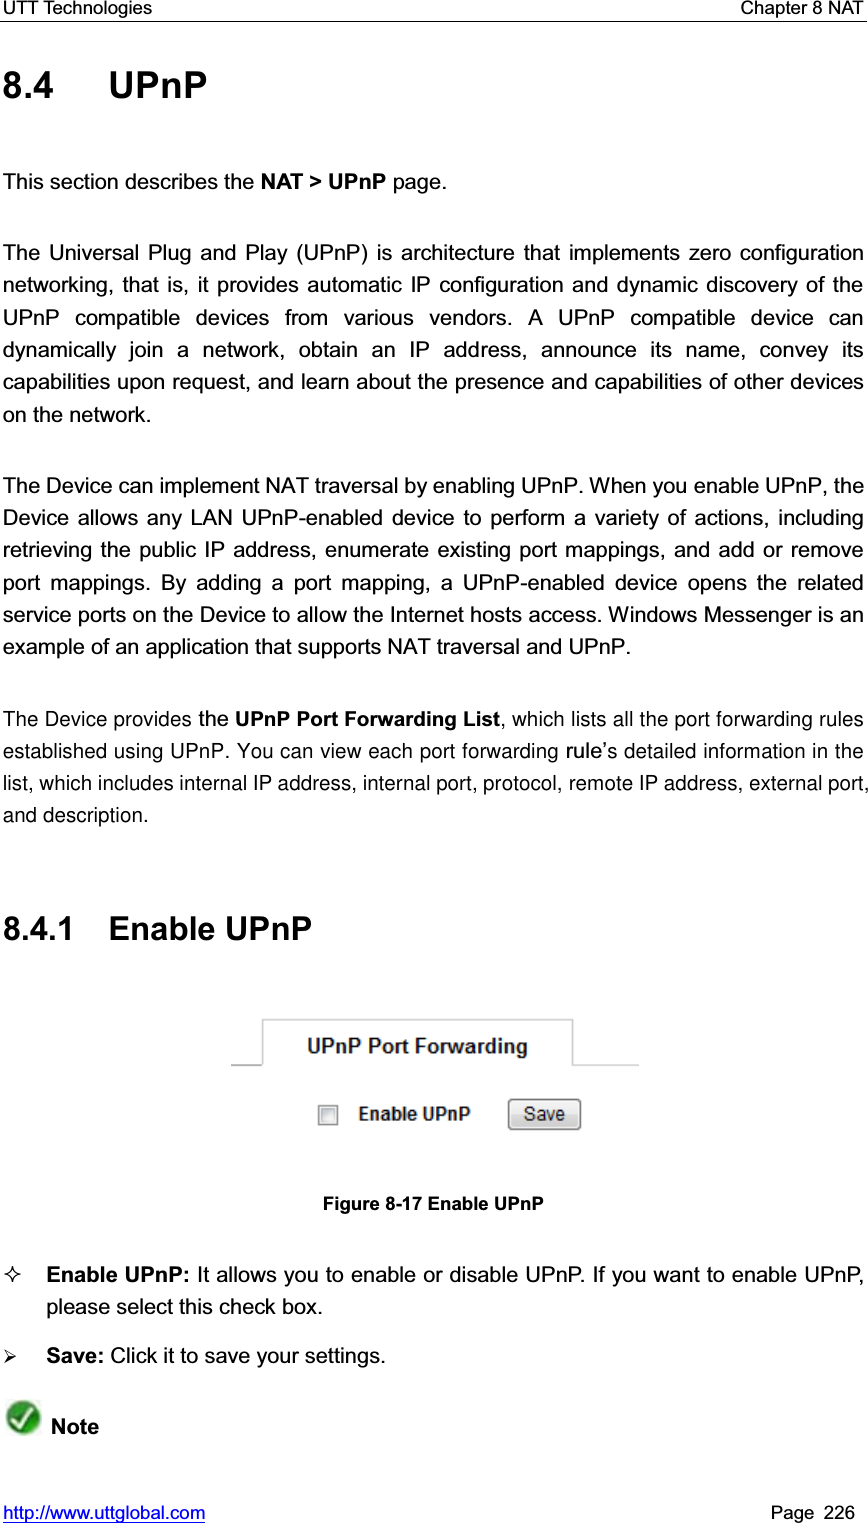 UTT Technologies    Chapter 8 NAT   http://www.uttglobal.com Page 226 8.4 UPnP This section describes the NAT &gt; UPnP page.   The Universal Plug and Play (UPnP) is architecture that implements zero configuration networking, that is, it provides automatic IP configuration and dynamic discovery of the UPnP compatible devices from various vendors. A UPnP compatible device candynamically join a network, obtain an IP address, announce its name, convey its capabilities upon request, and learn about the presence and capabilities of other devices on the network.   The Device can implement NAT traversal by enabling UPnP. When you enable UPnP, the Device allows any LAN UPnP-enabled device to perform a variety of actions, including retrieving the public IP address, enumerate existing port mappings, and add or remove port mappings. By adding a port mapping, a UPnP-enabled device opens the related service ports on the Device to allow the Internet hosts access. Windows Messenger is an example of an application that supports NAT traversal and UPnP. The Device provides the UPnP Port Forwarding List, which lists all the port forwarding rules established using UPnP. You can view each port forwarding rule¶s detailed information in the list, which includes internal IP address, internal port, protocol, remote IP address, external port, and description.8.4.1 Enable UPnP Figure 8-17 Enable UPnP Enable UPnP: It allows you to enable or disable UPnP. If you want to enable UPnP, please select this check box. ¾Save: Click it to save your settings.Note